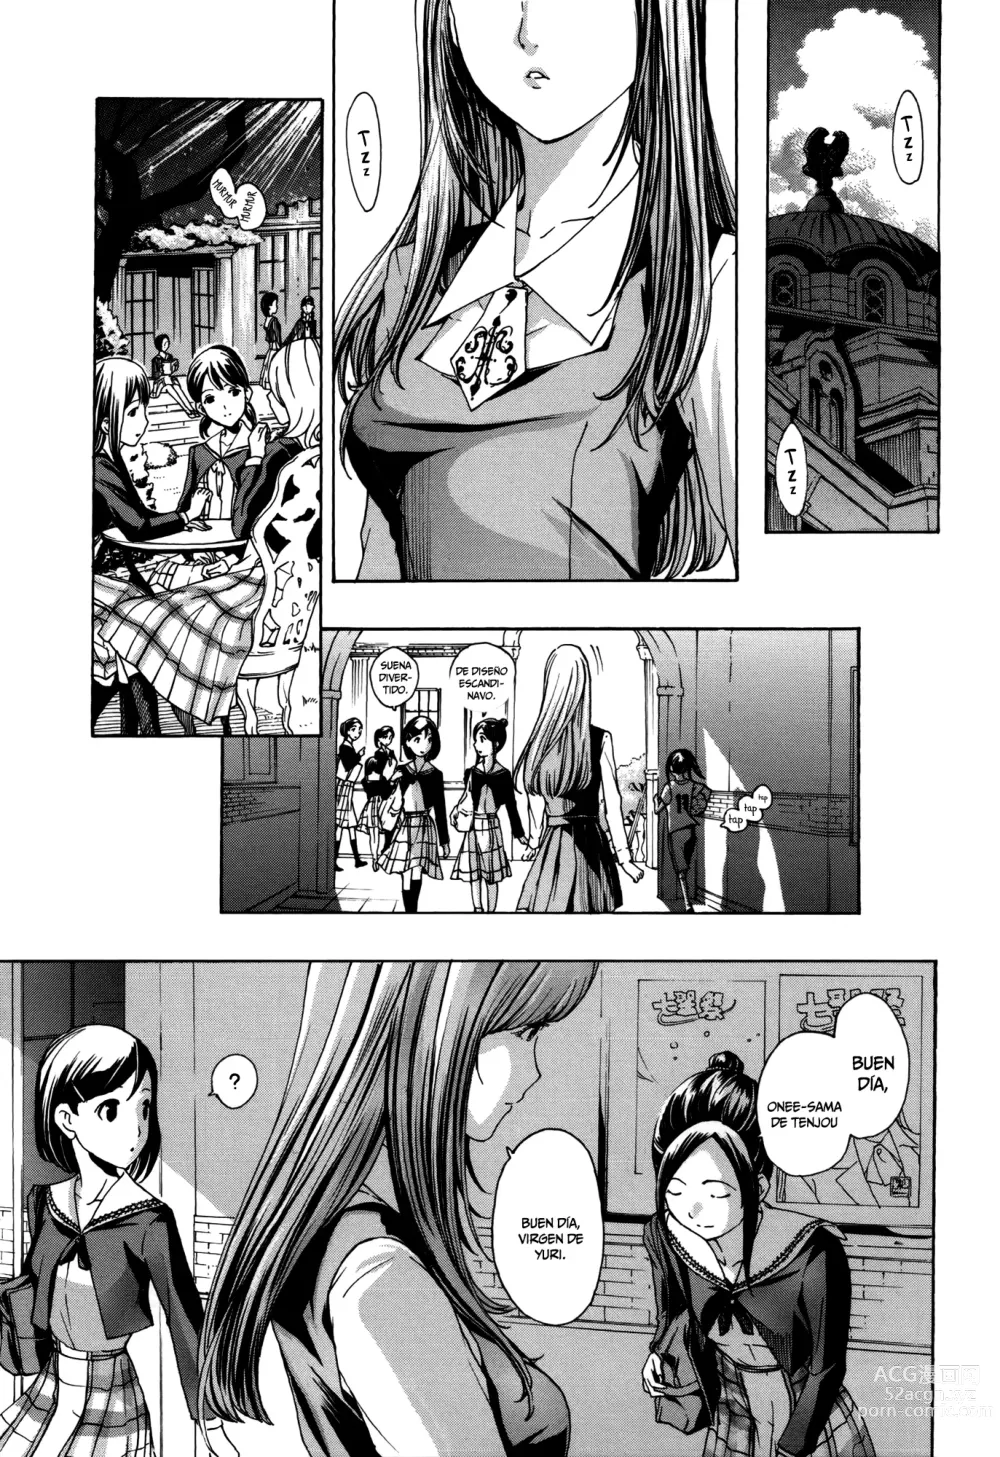 Page 7 of manga Otome Saku. - Maidens bloom in the garden in the sky